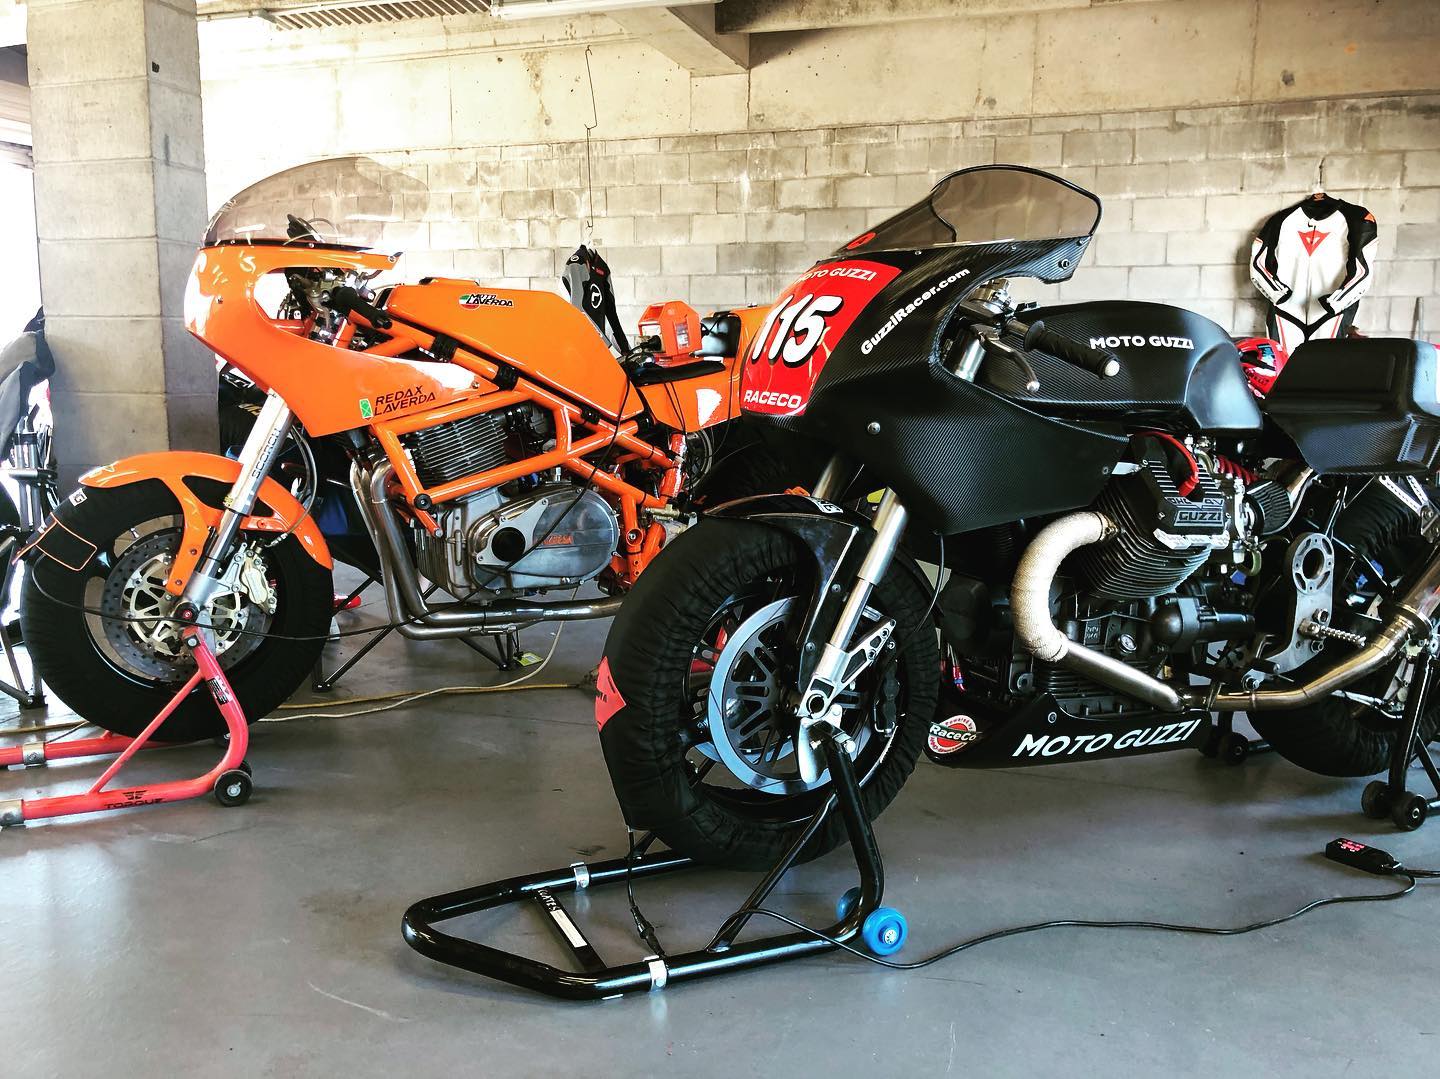 In good company. The RaceCo Daytona and the Redax Laverda at the Australian National Bears Challenge in the Top End.